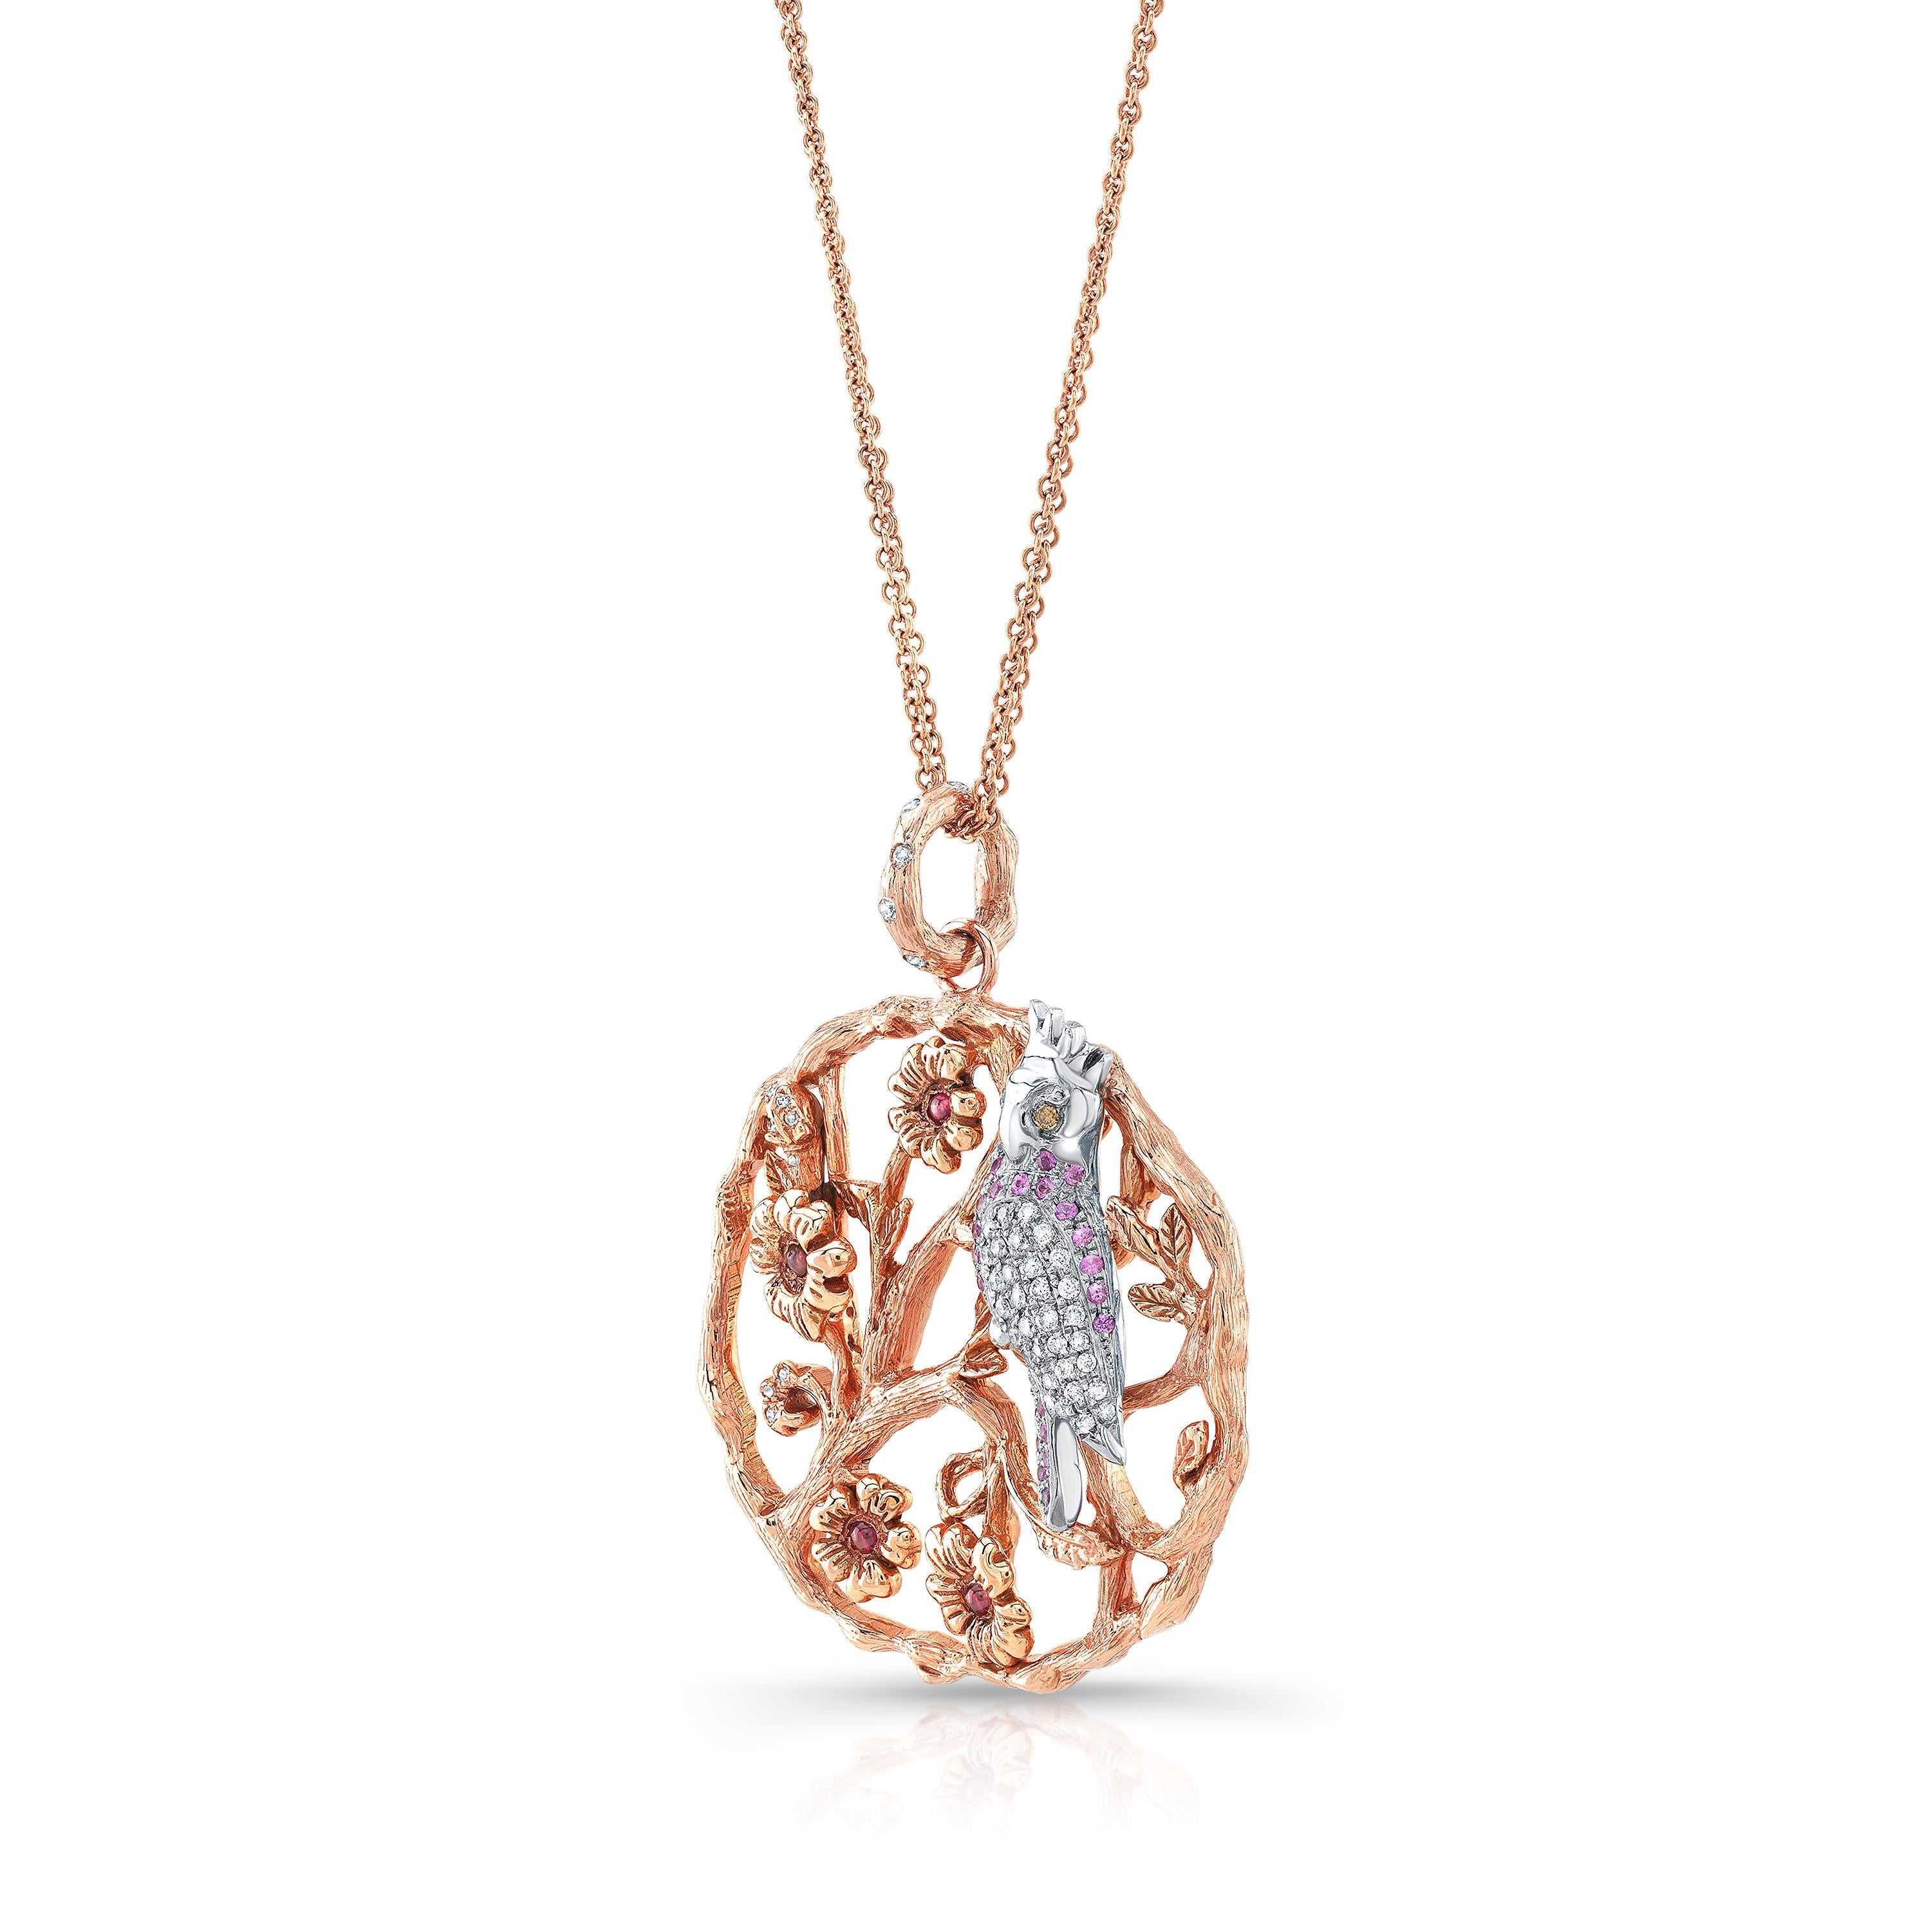 Amy Y’s Contemporary 18K-rose gold, diamond, ruby and sapphire bird and vine motif pendant necklace is a glorious replica of Australia’s native Galah bird. Beautifully handmade by Amy’s esteemed European artisans in 18K-rose gold and platinum, this